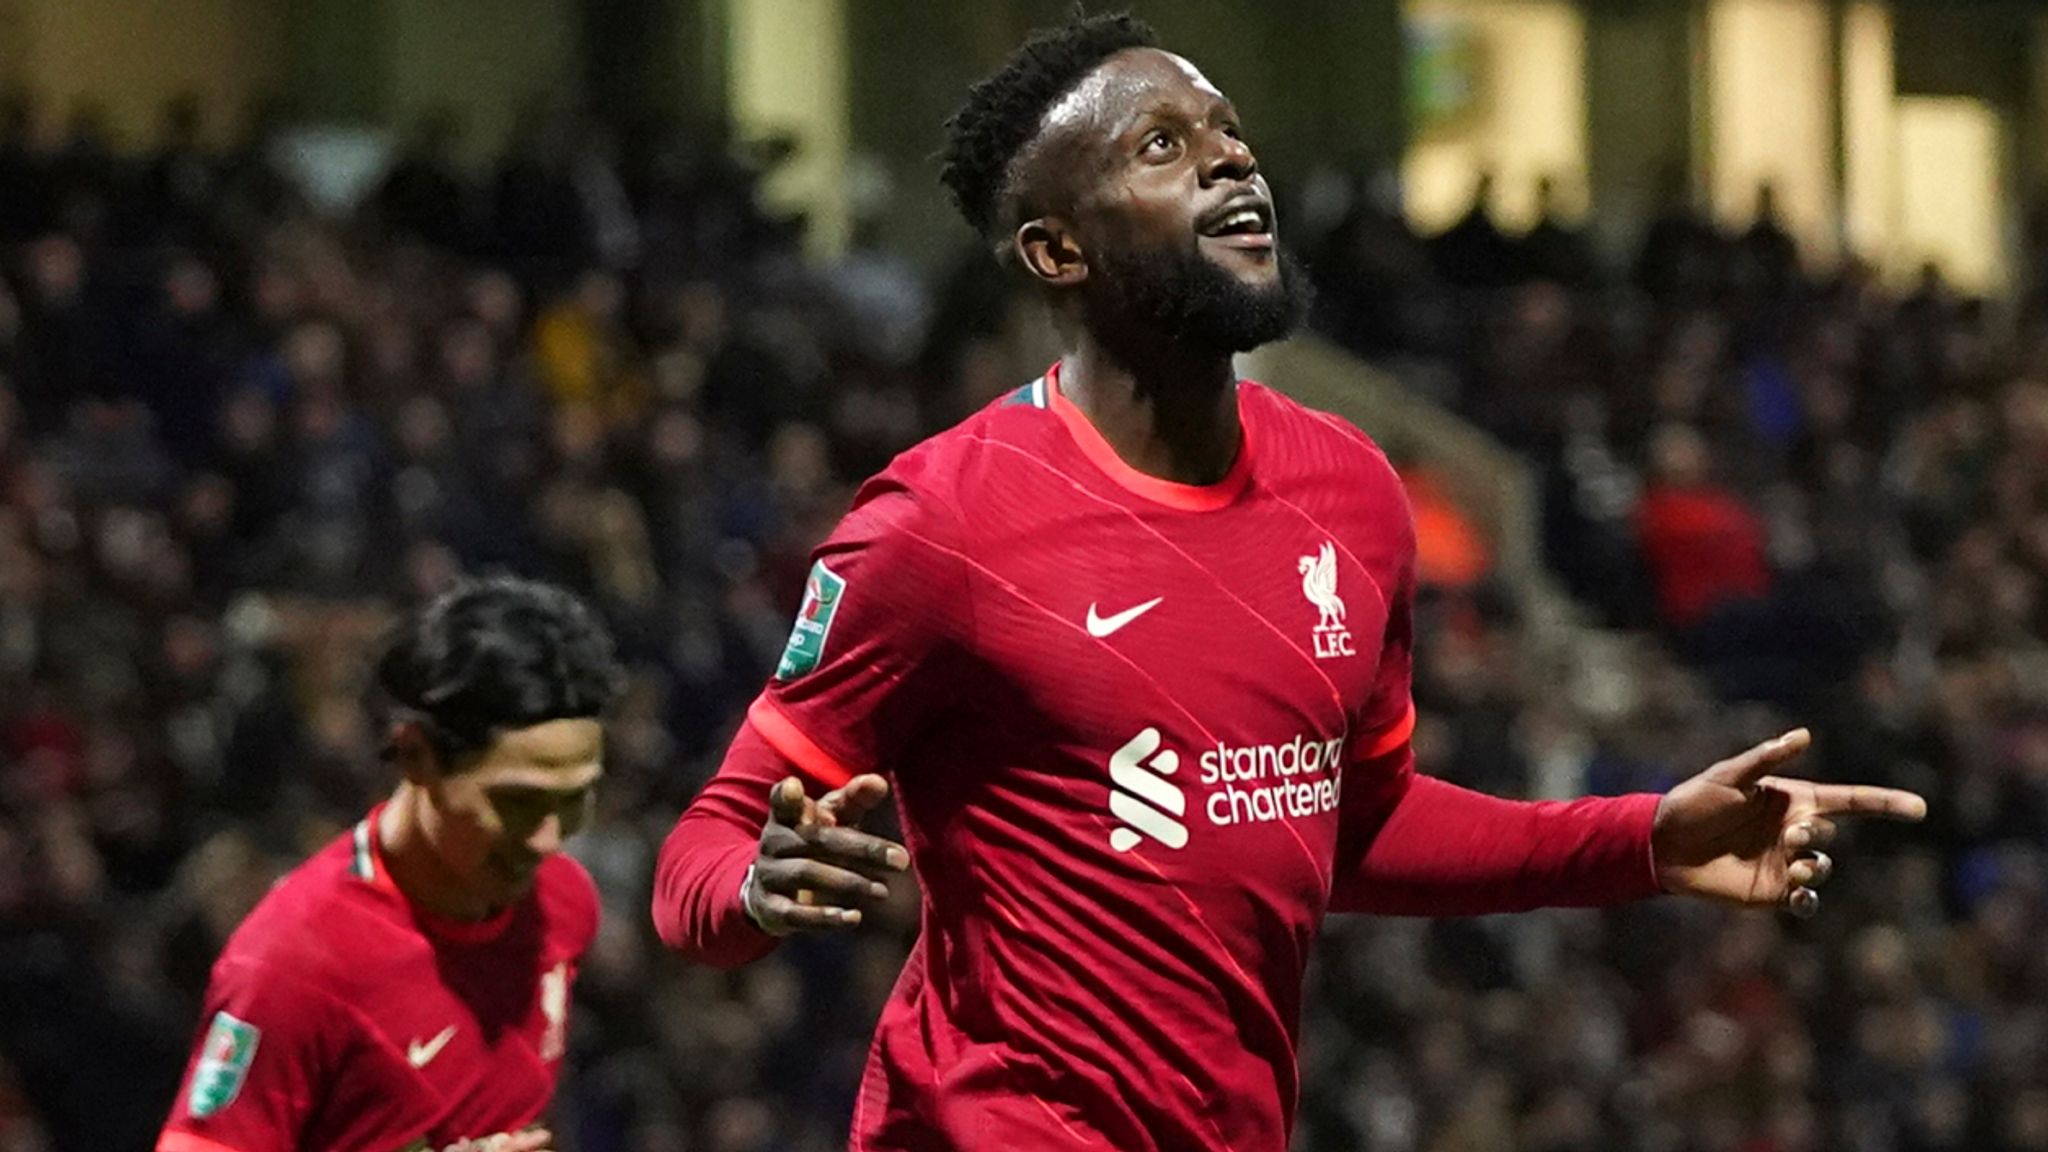 Divock Origi: Liverpool Striker Wanted By Italian Clubs But Prefers Premier League Move Transfer Centre News Sky Sports | peacecommission.kdsg.gov.ng